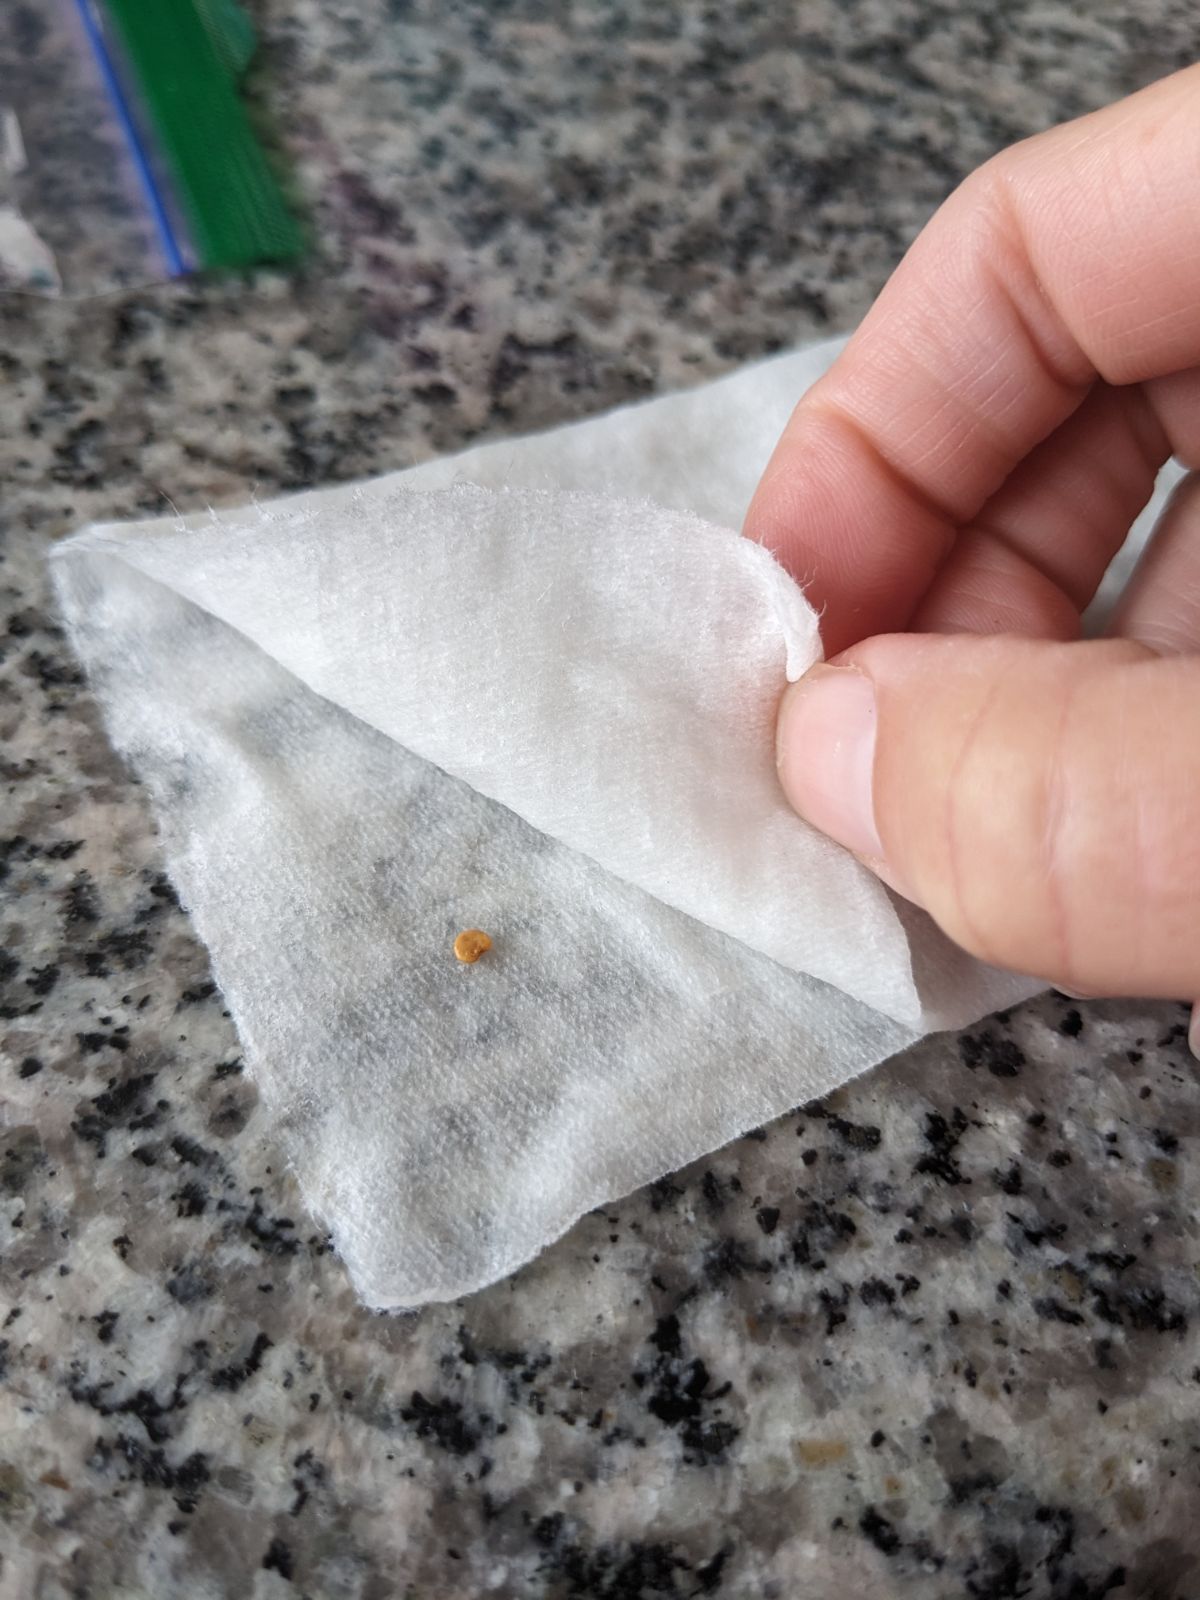 Folded paper towel with seeds inside